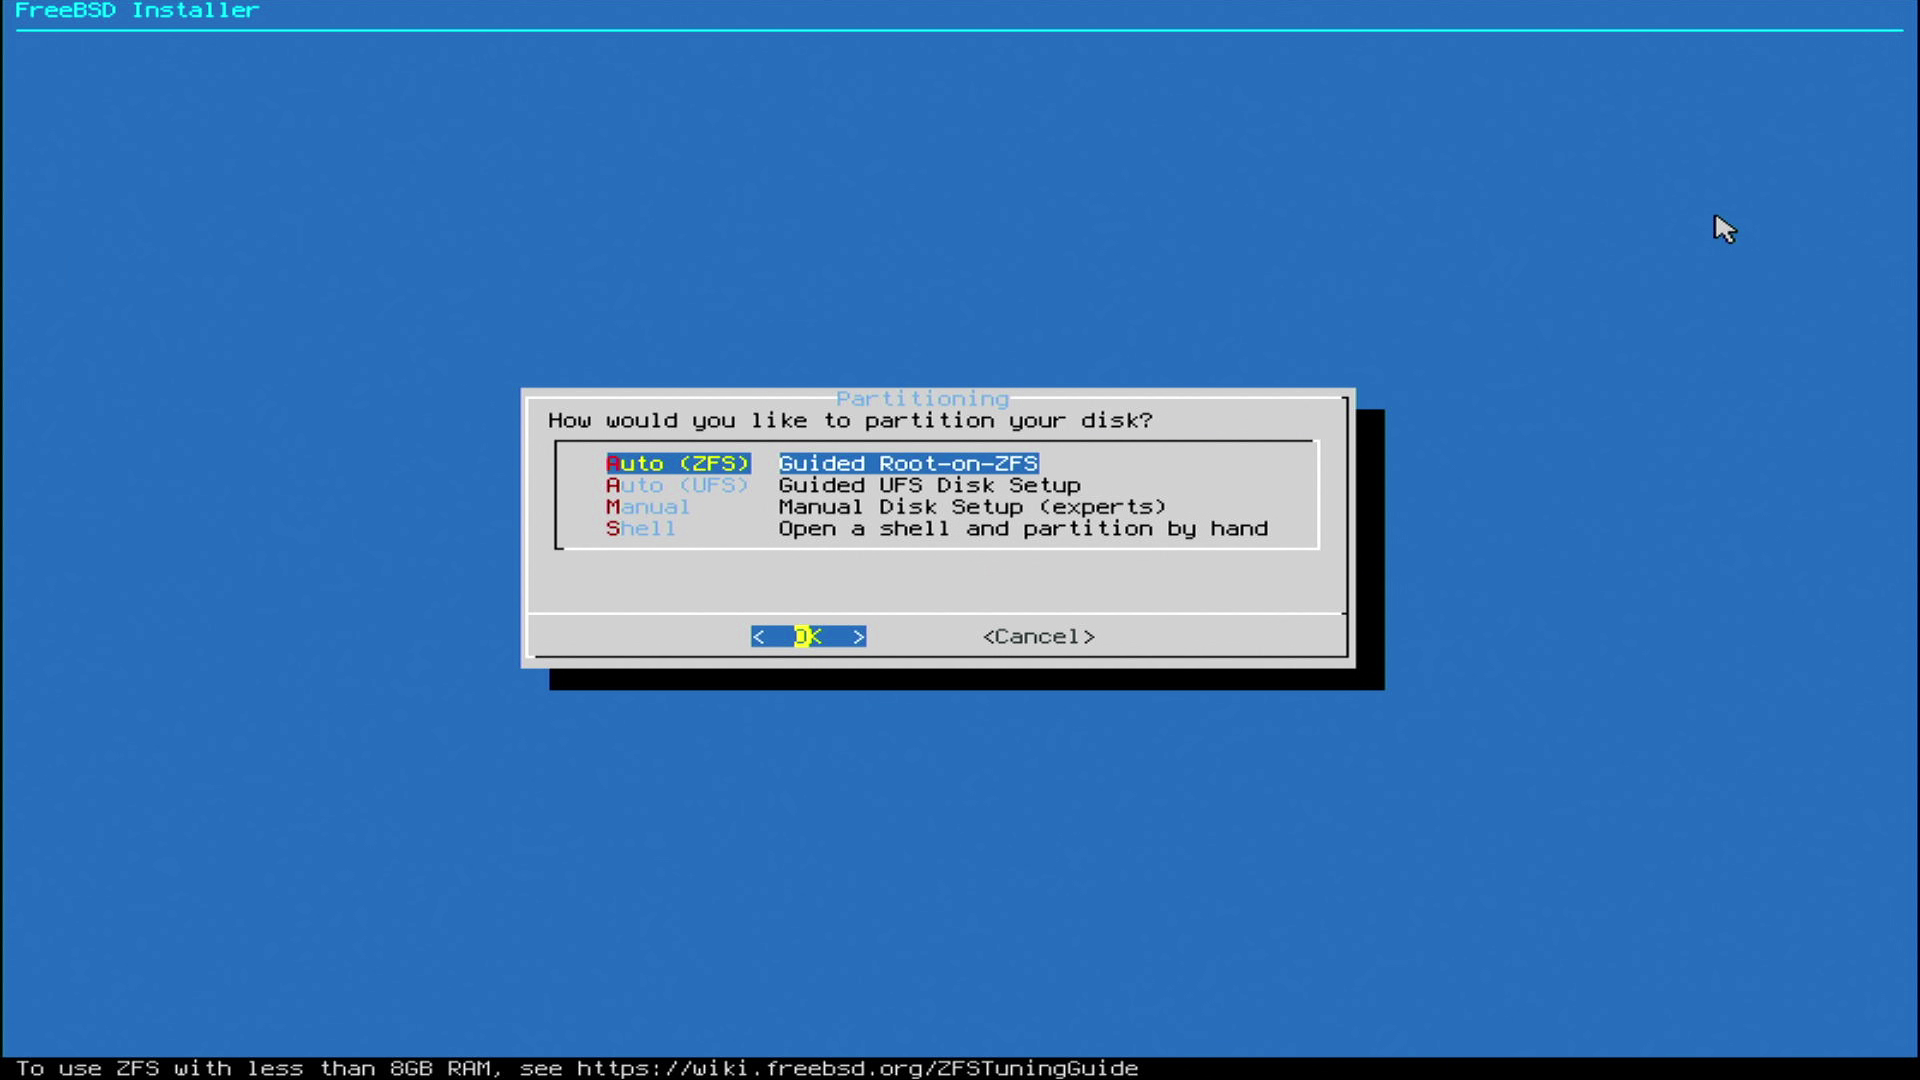 FreeBSD-Instalation-16.png